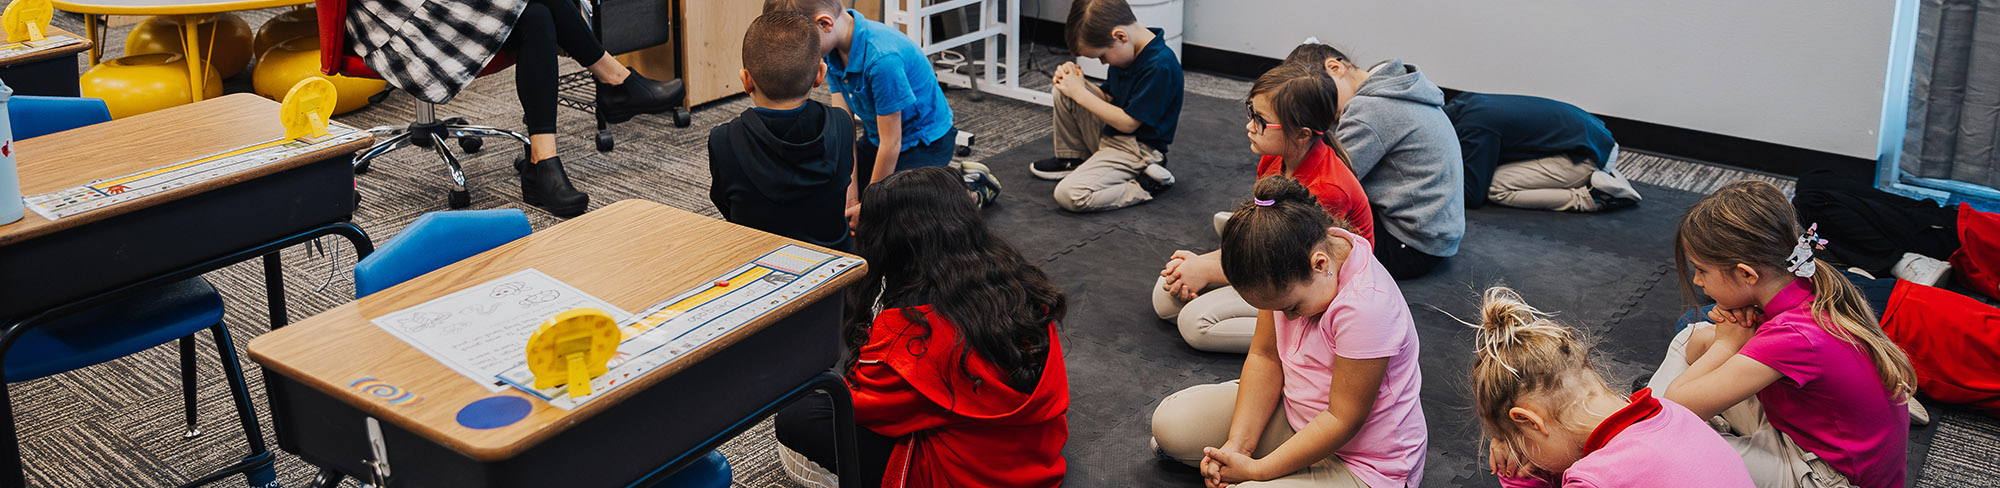 Elementary students praying and sitting on the classroom floor